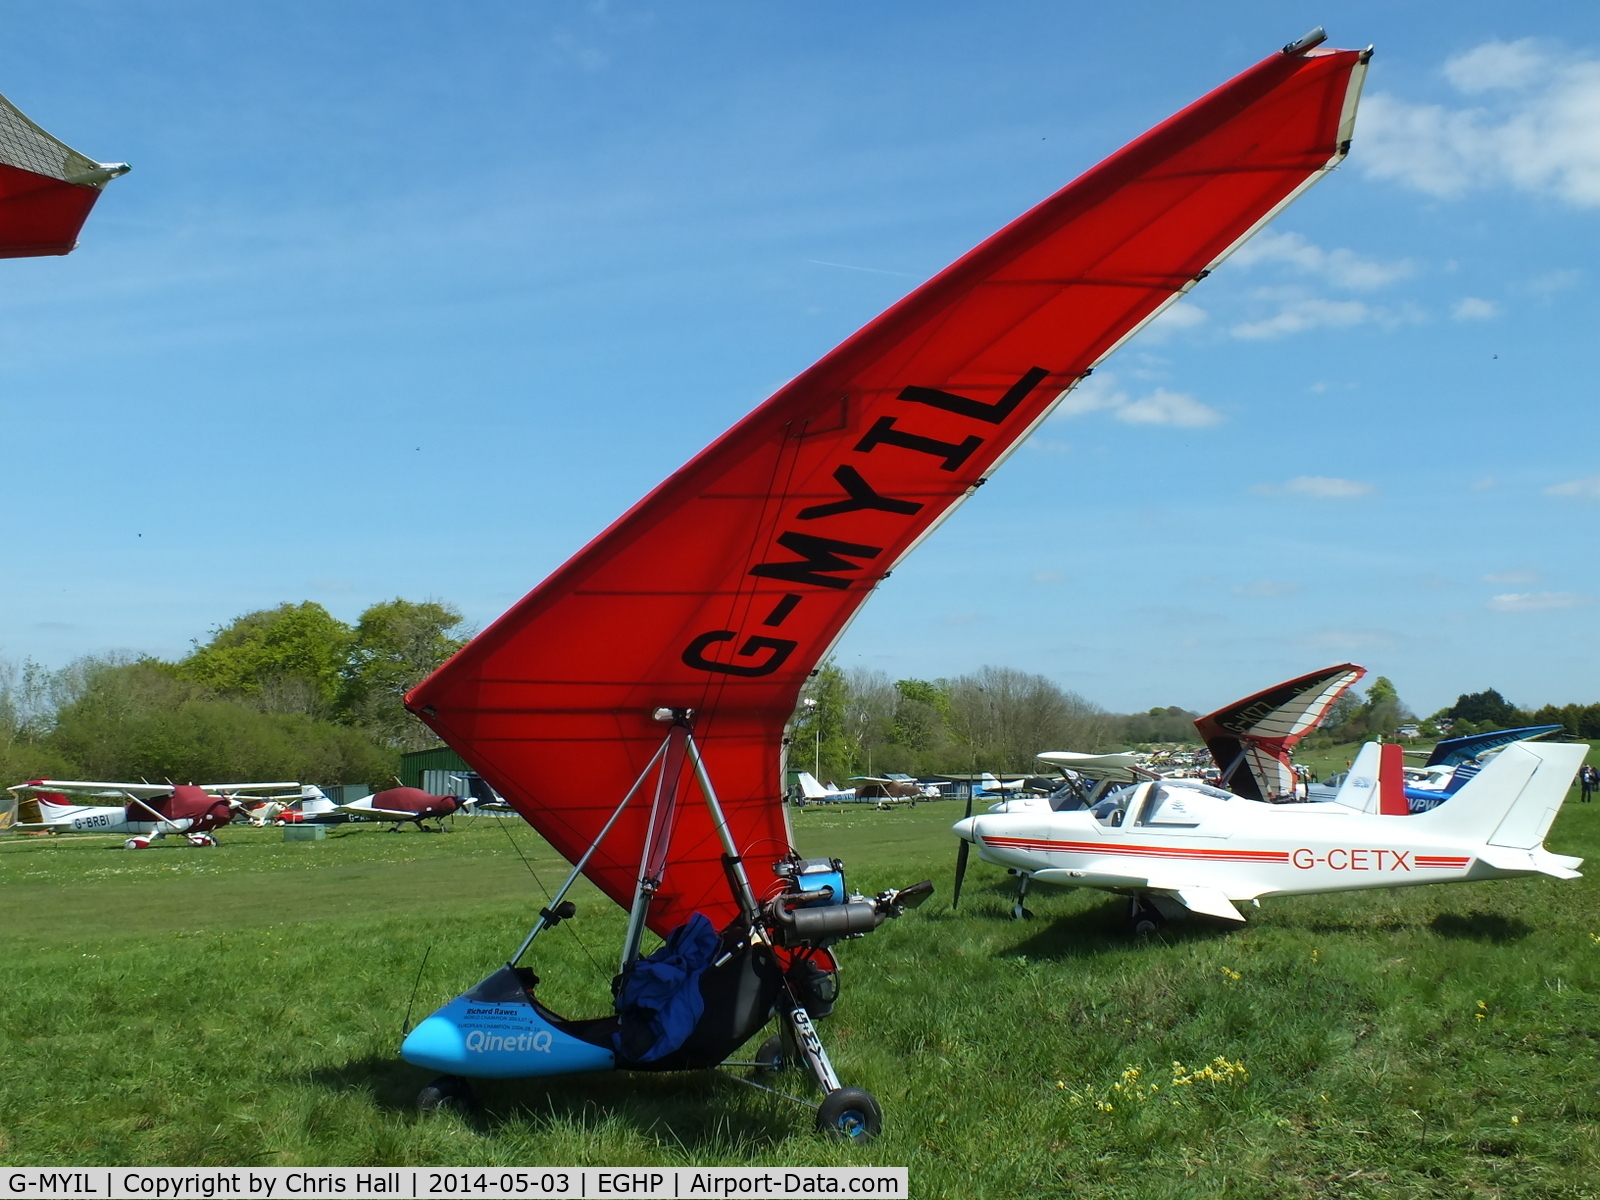 G-MYIL, 1993 Cyclone Airsports Chaser S 508 C/N CH849, at the 2014 Microlight Trade Fair, Popham